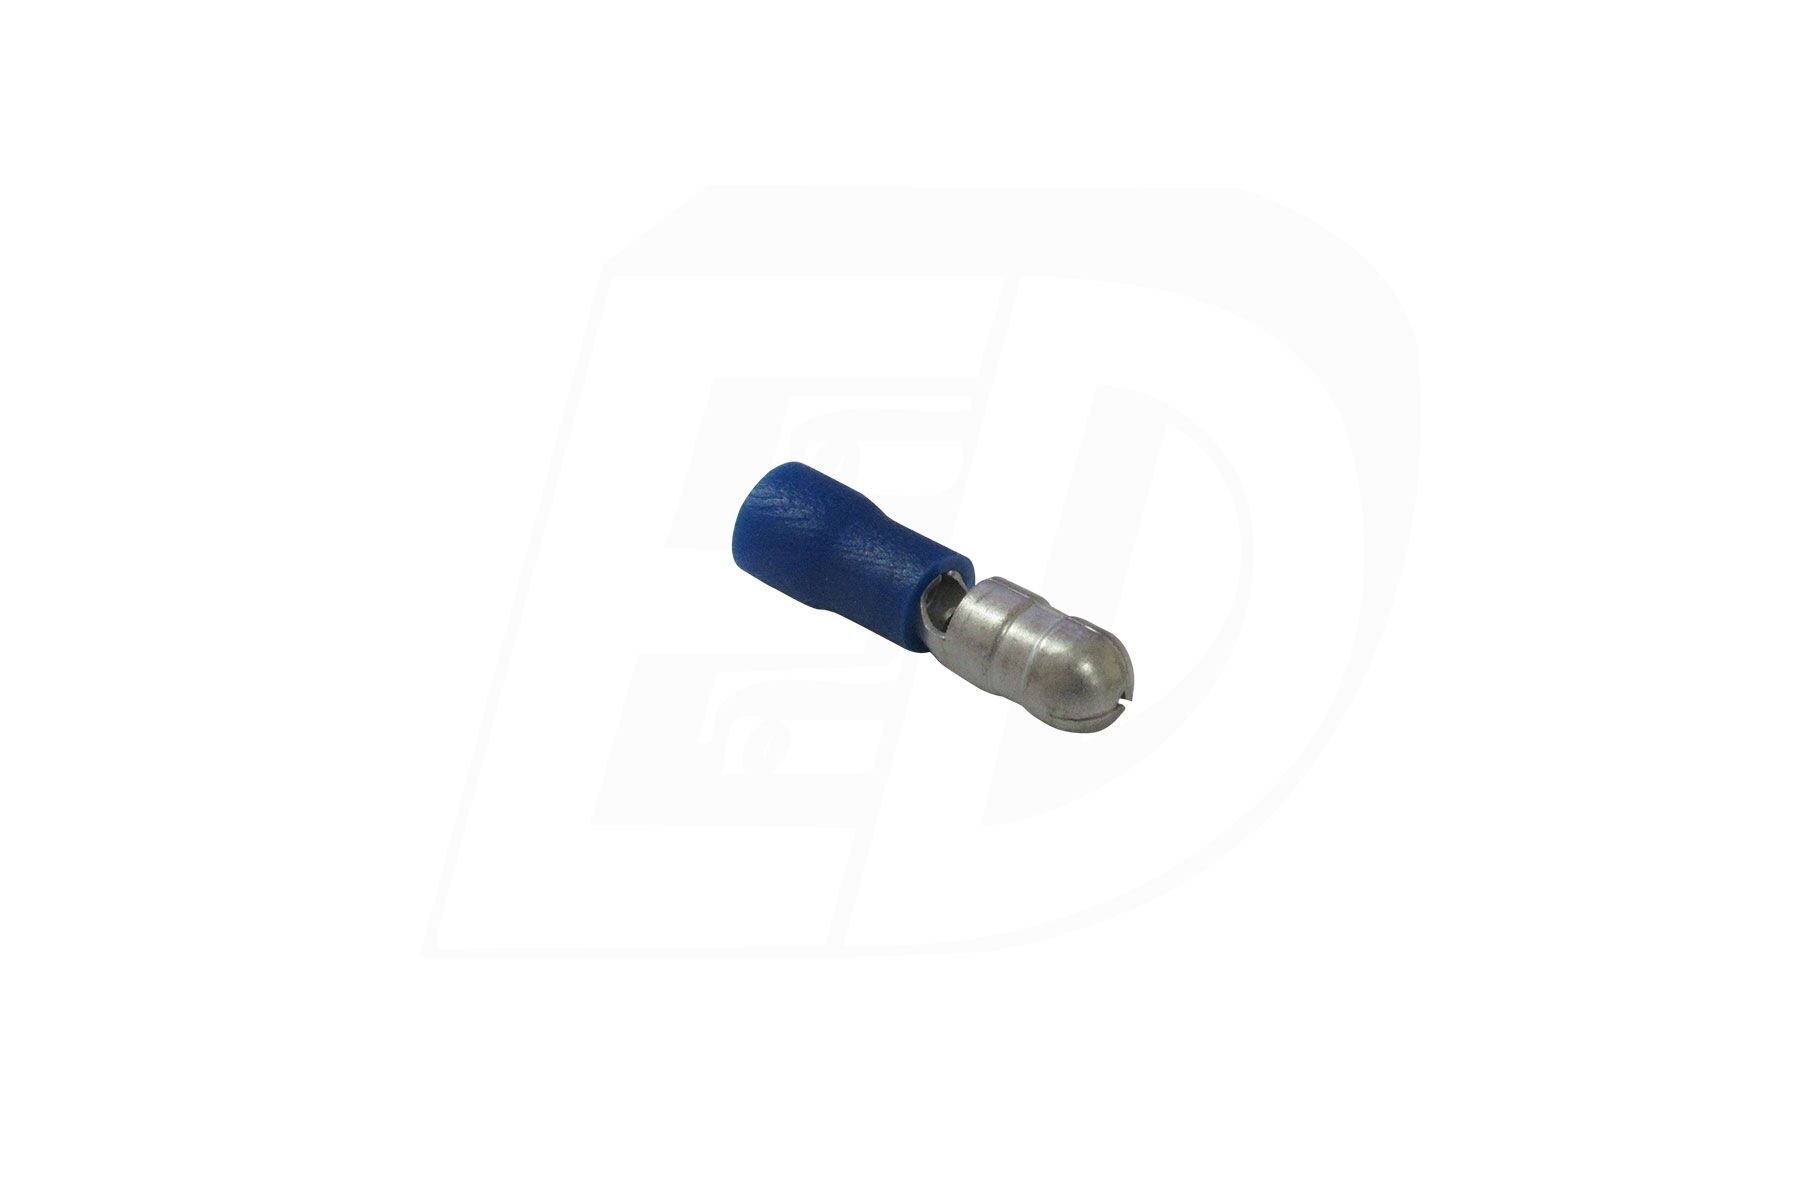 Butted Seam Vinyl Insulated Male Bullet Connectors 16 - 14 AWG